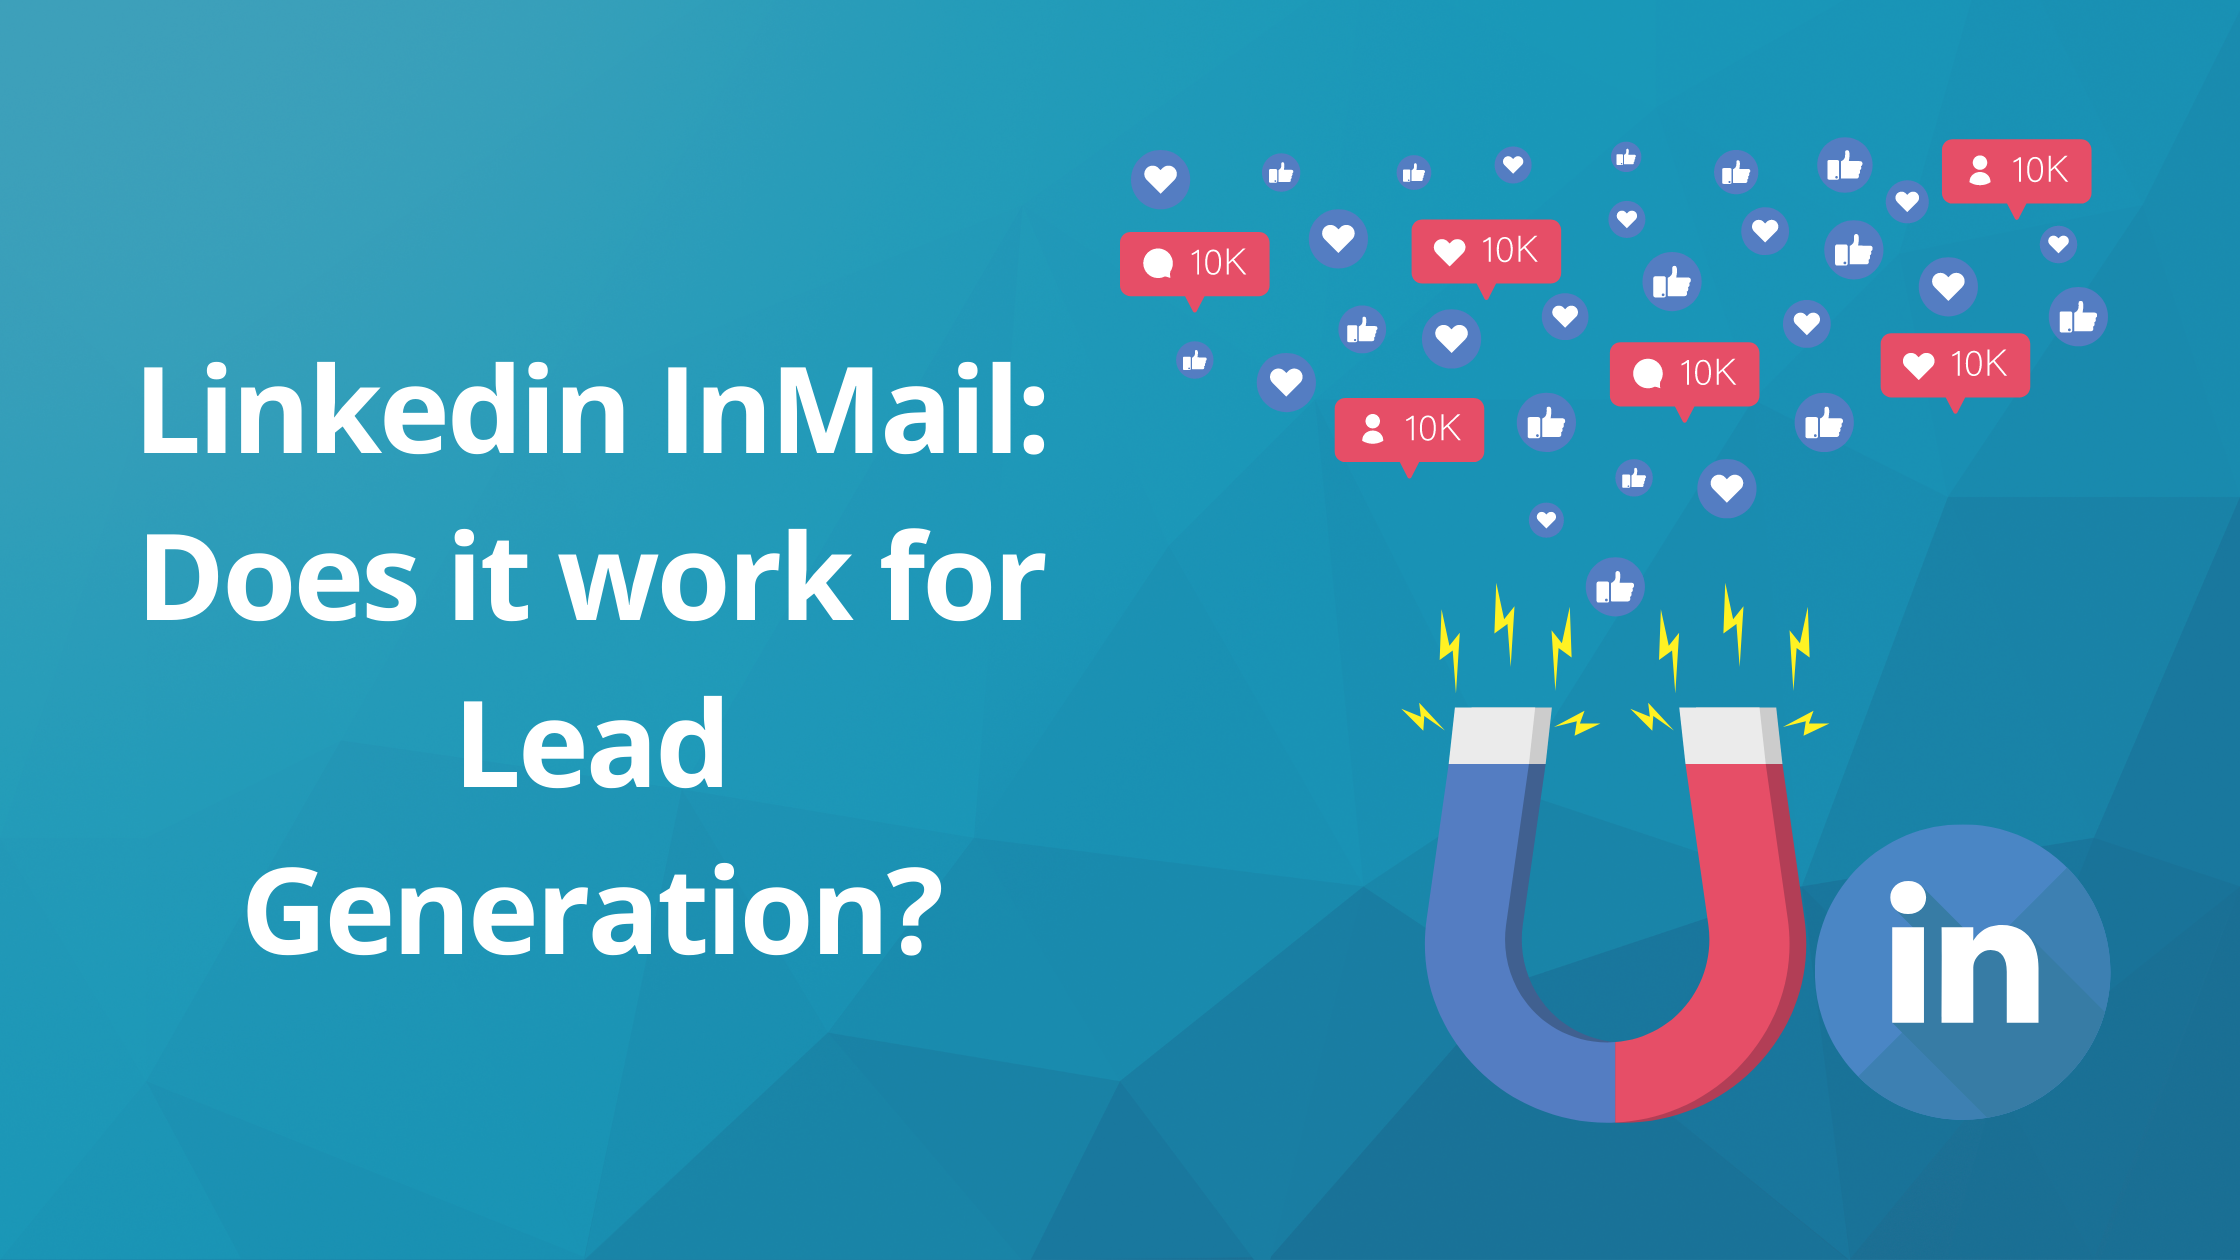 Linkedin InMail: Does it work for Lead Generation?